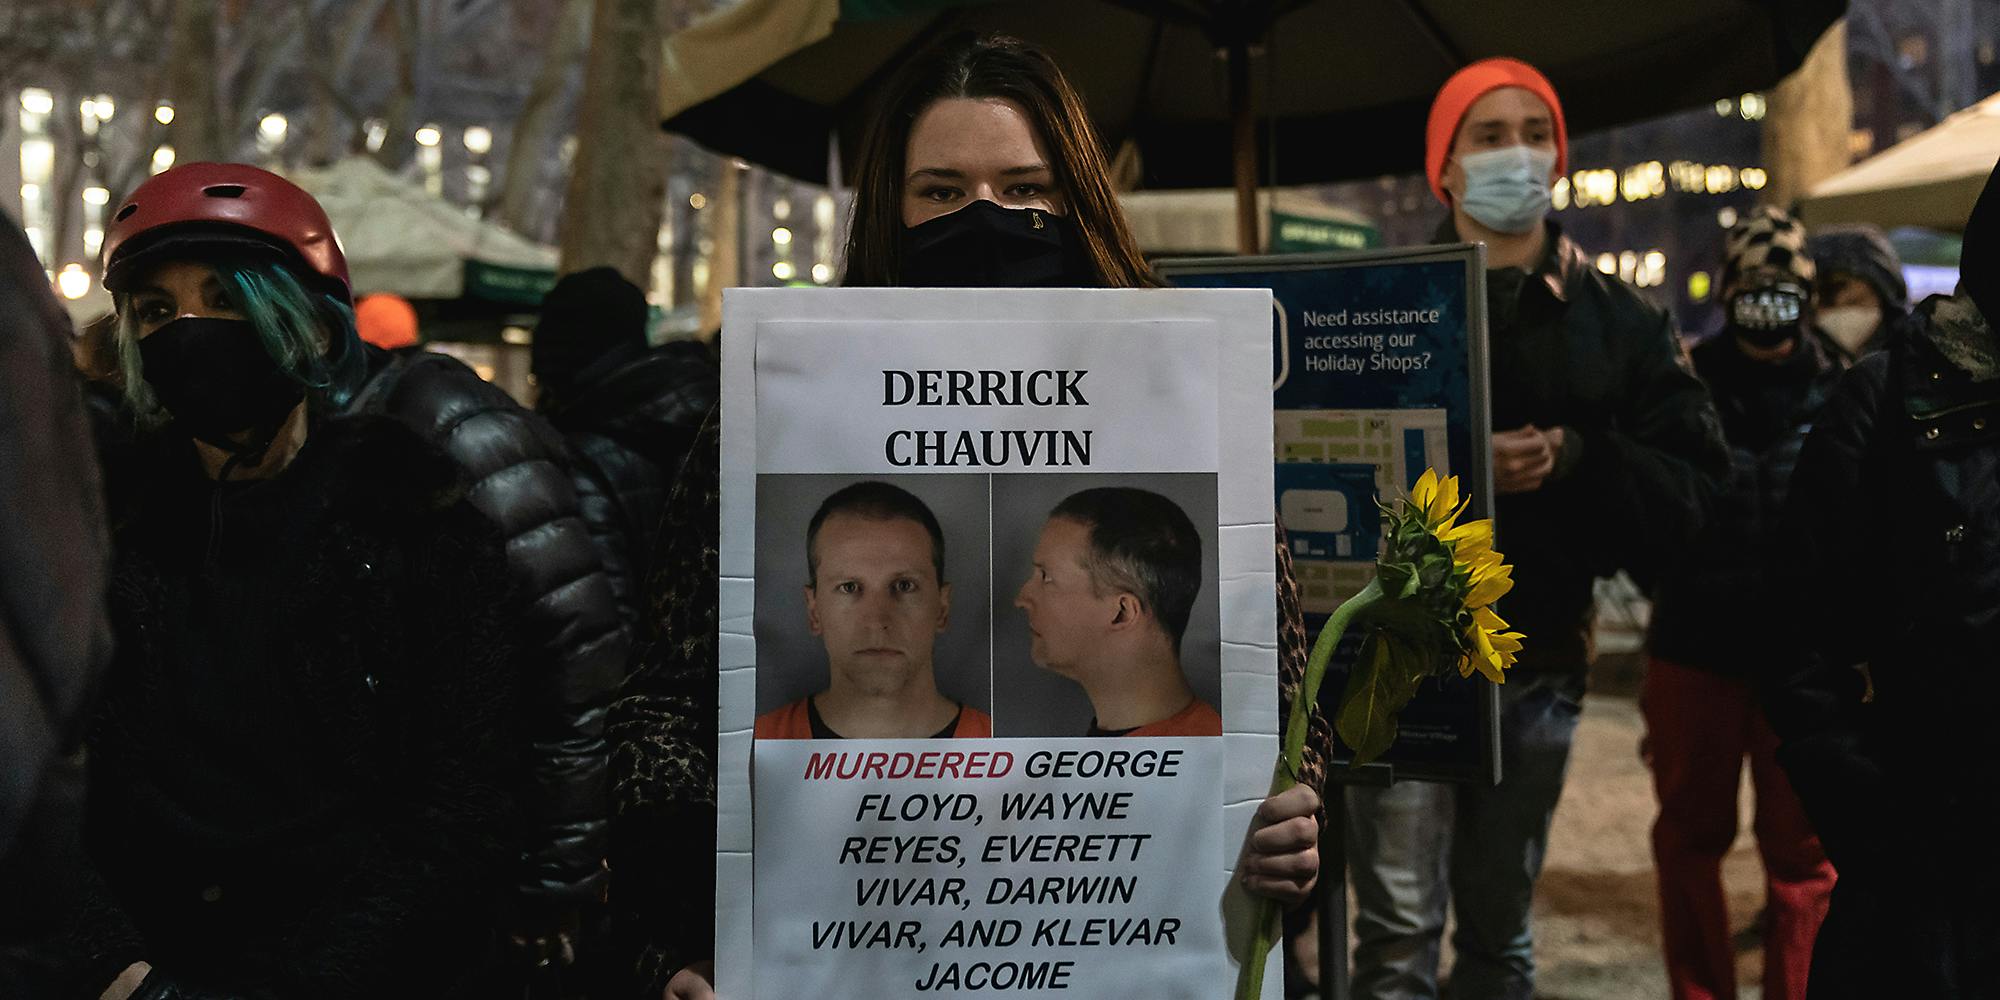 A woman holding a wanted sign for Derek Chauvin.